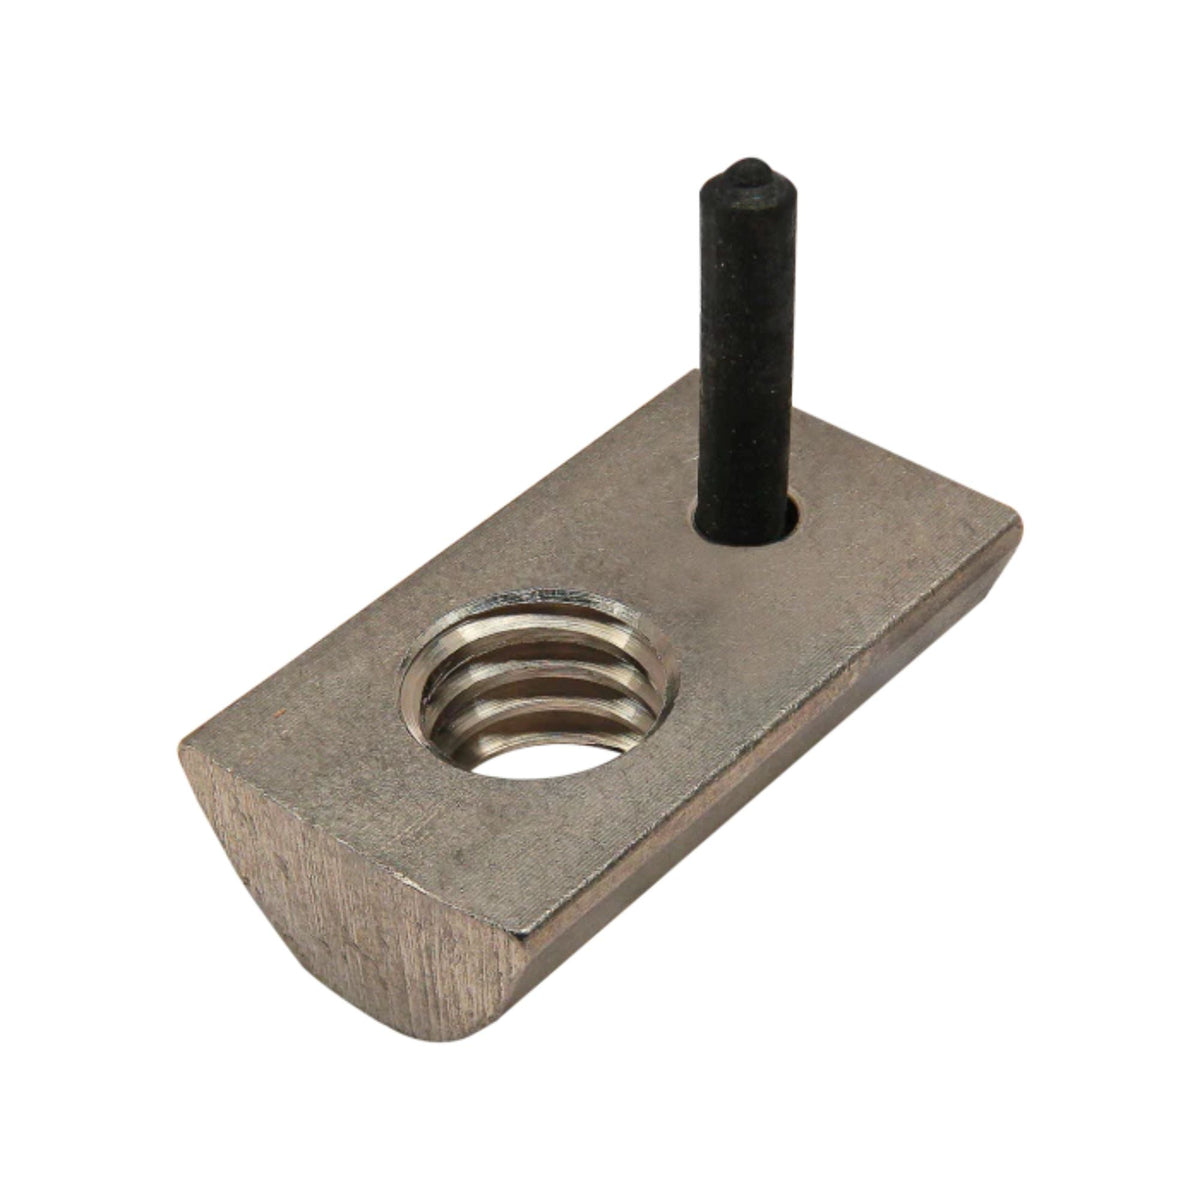 metal rectangular t-nut with a rounded bottom a flat top a threaded hole on one side and a small hole on the other side with a cylindrical peg inserted into it